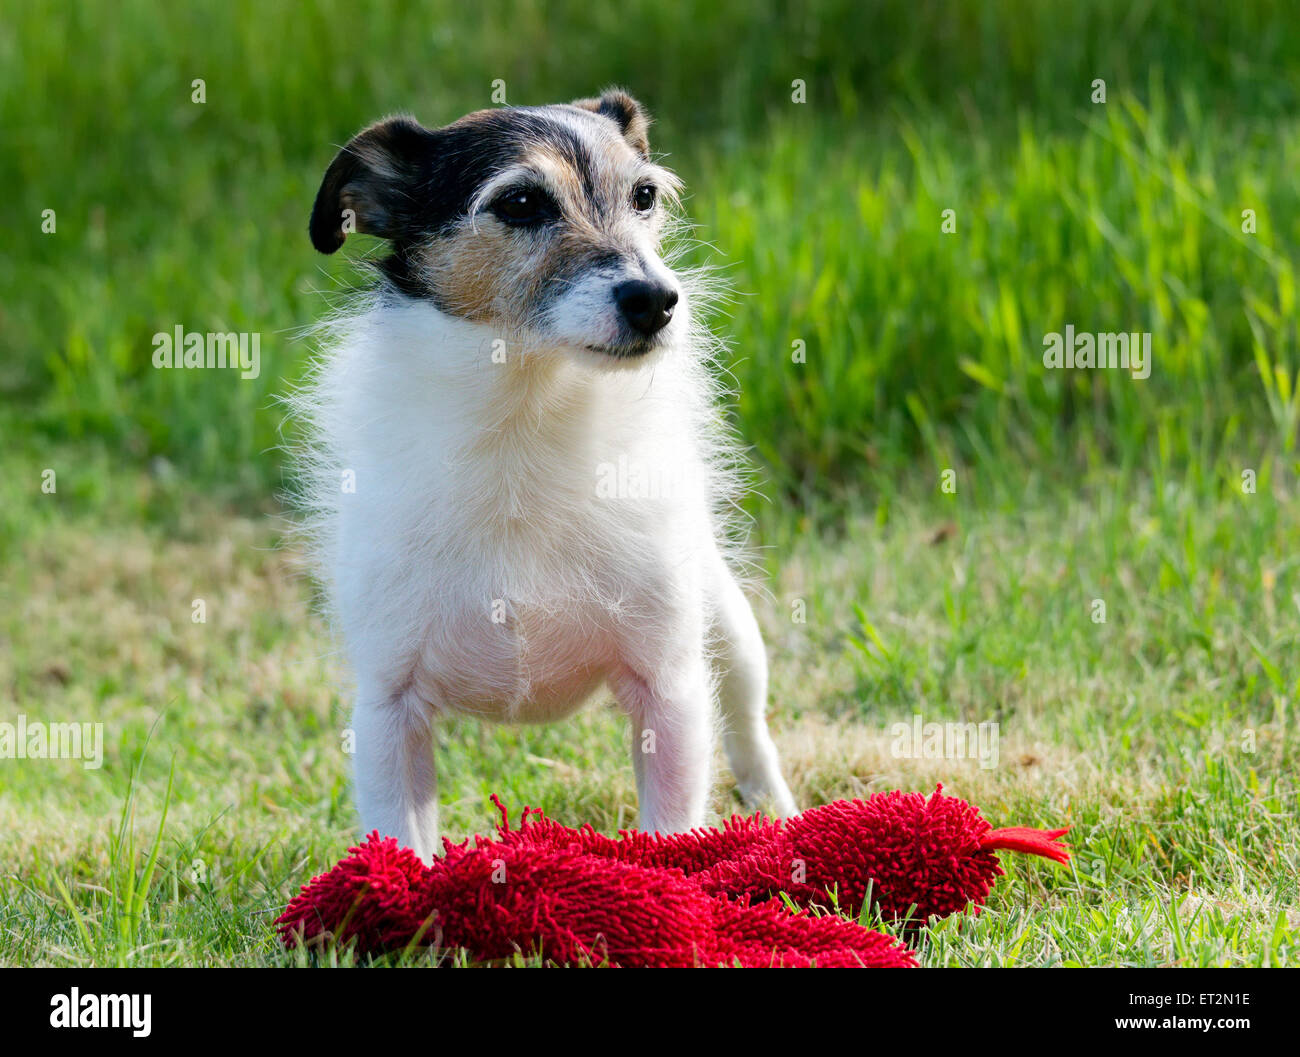 Jack Russell Terrier with a soft toy outside on grass Stock Photo